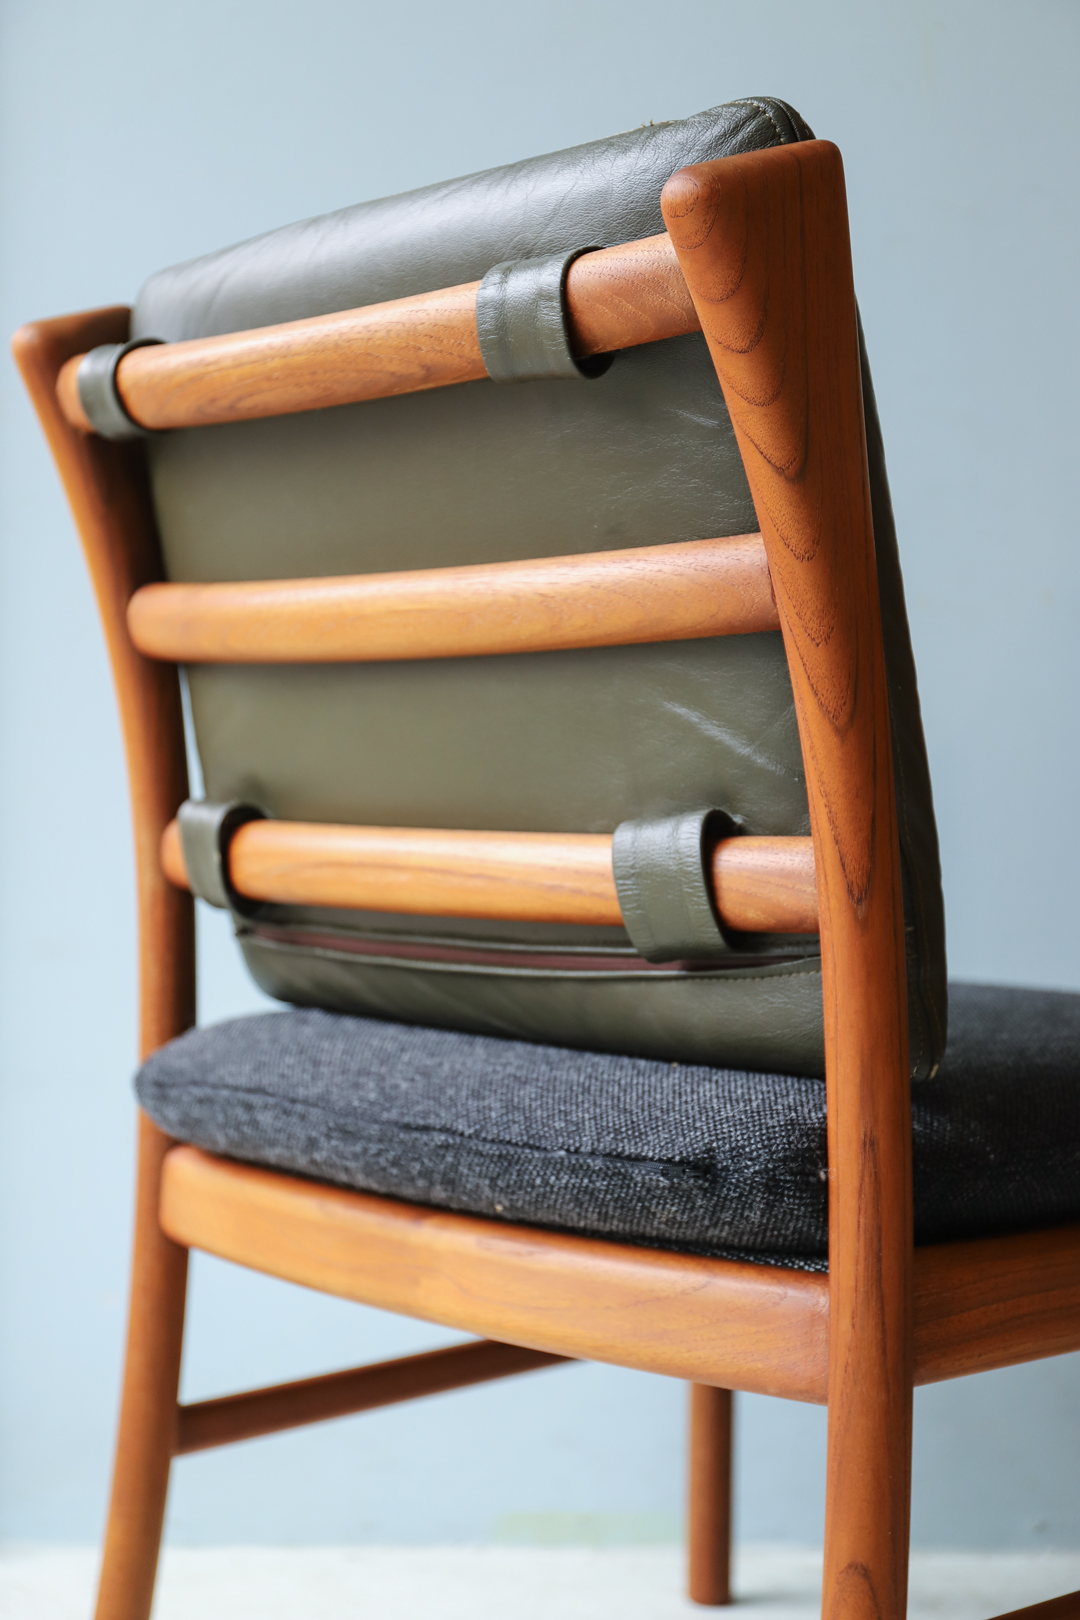 Japanese Vintage HITA CRAFTS Dining Chair Armless/日田工芸 ダイニングチェア アームレス ジャパンヴィンテージ チーク材